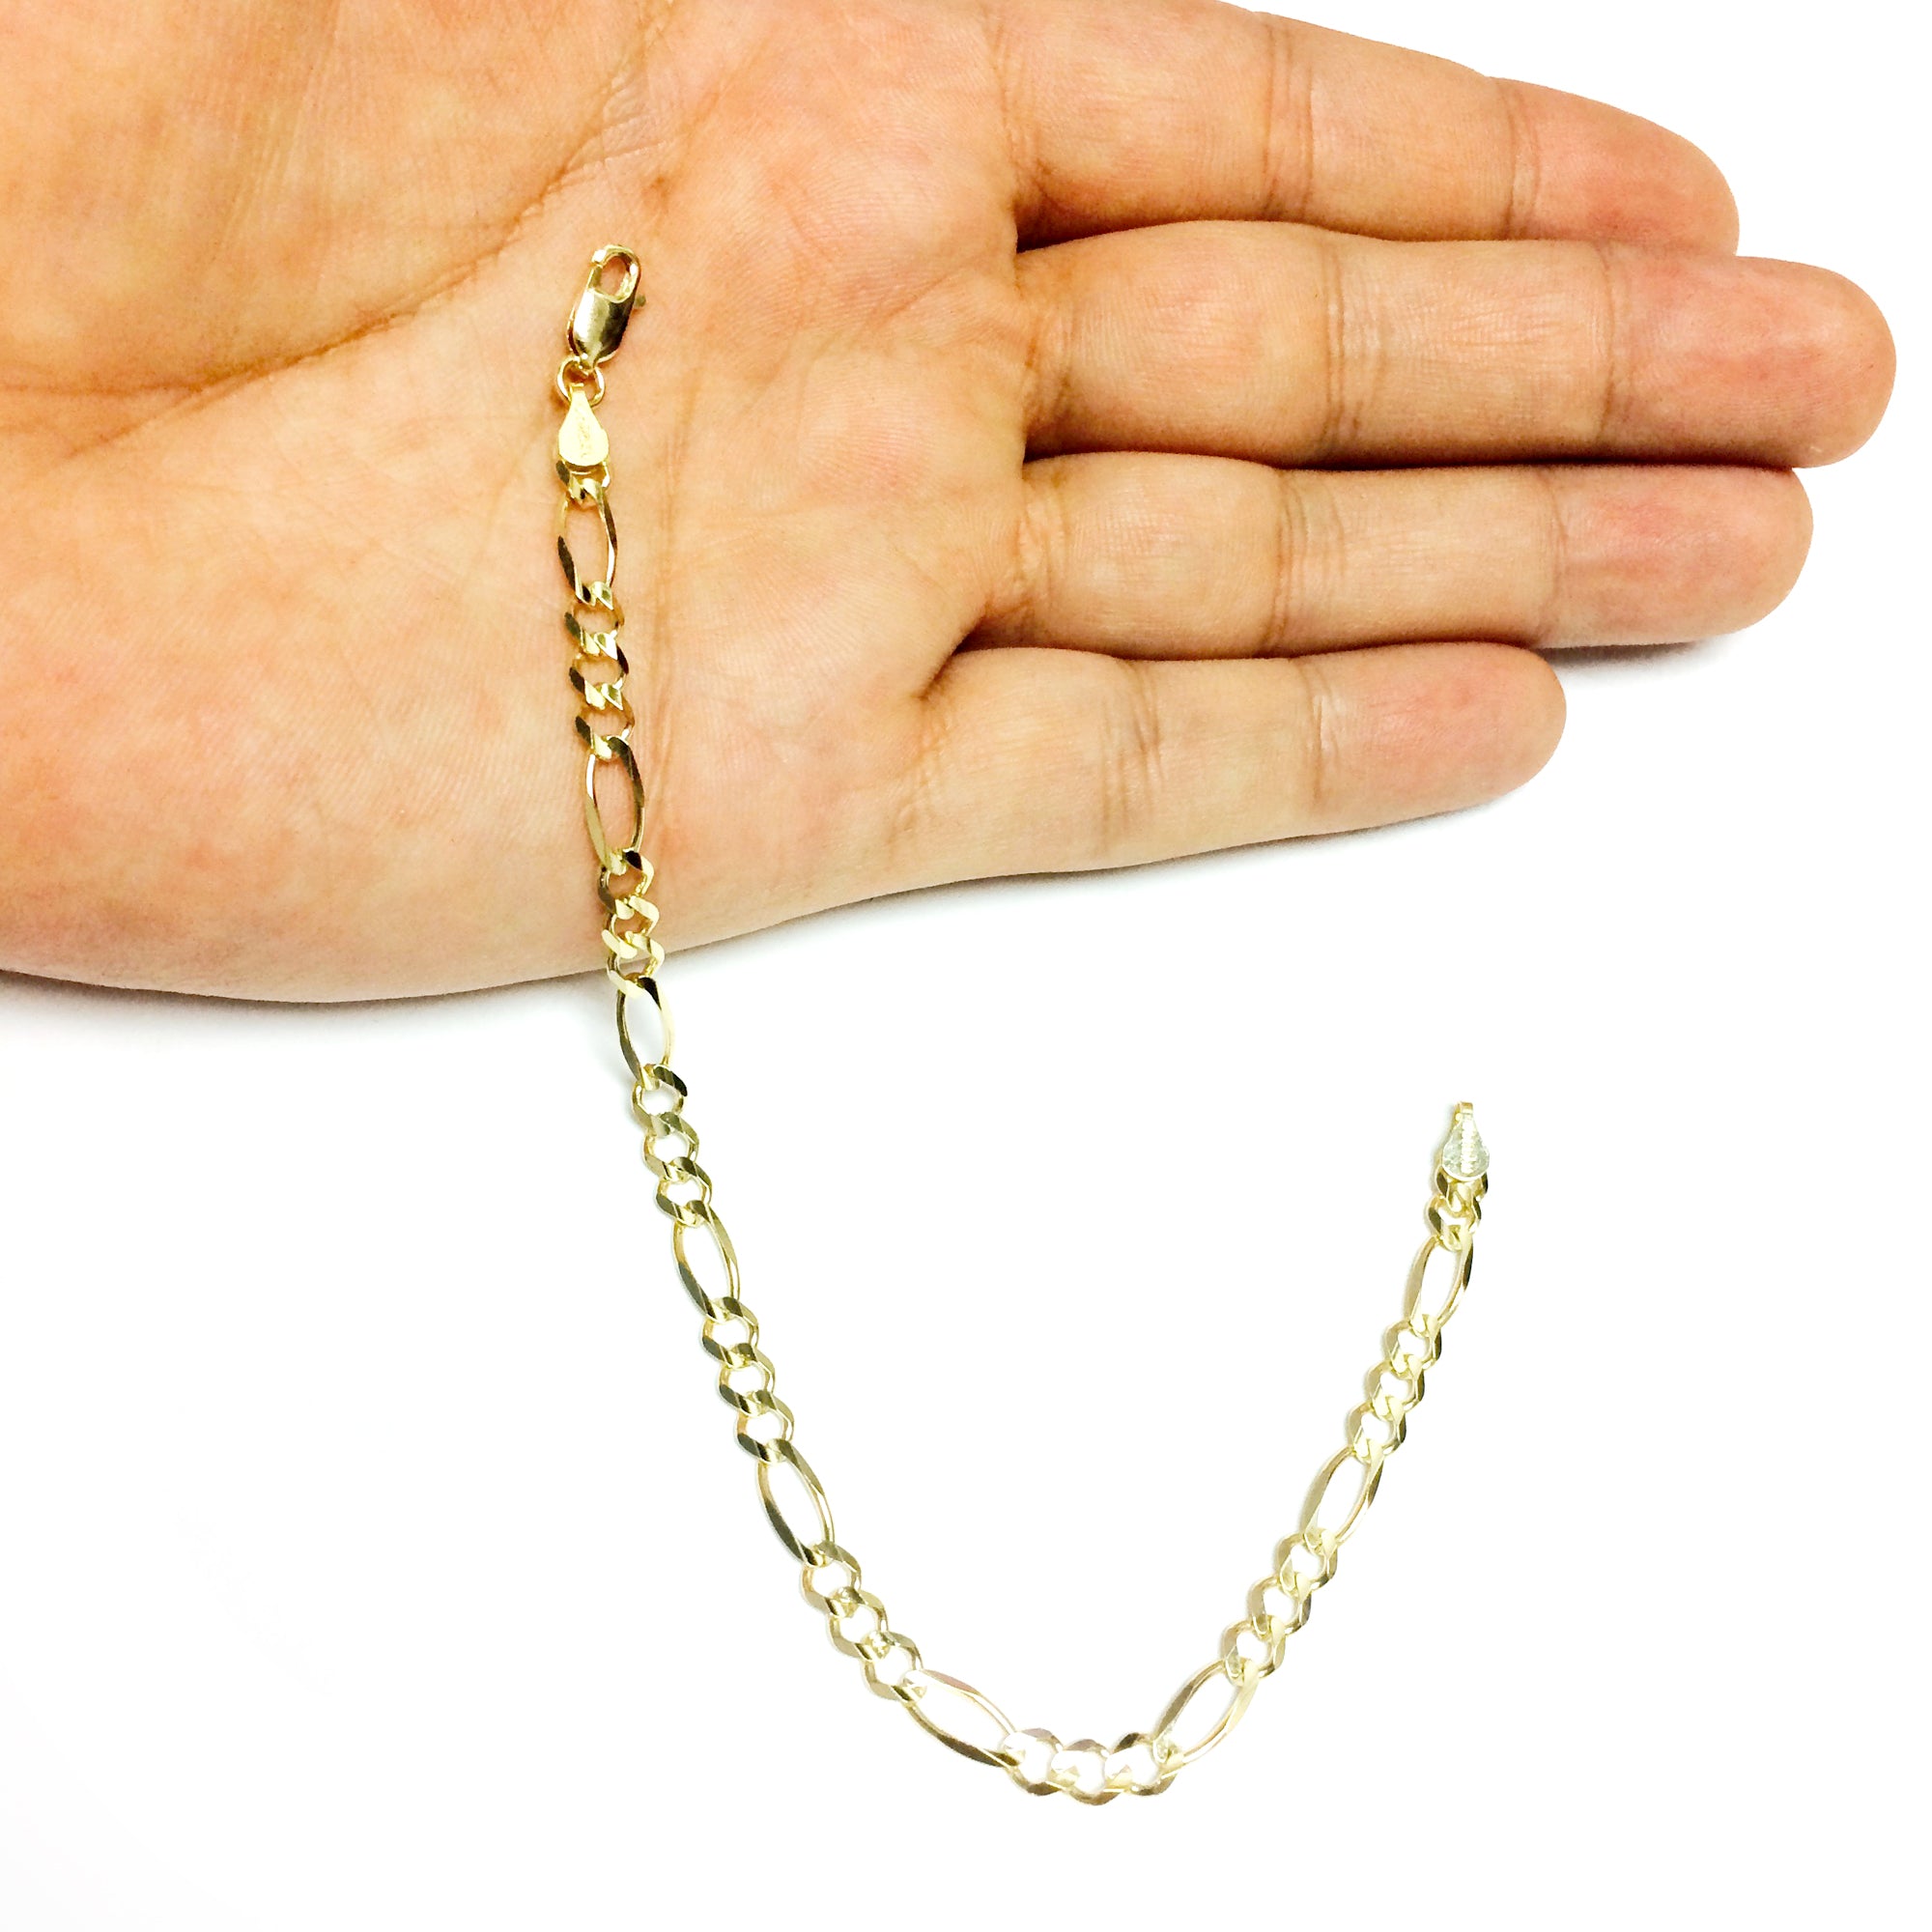 10k Yellow Gold Solid Figaro Chain Bracelet, 5.0mm fine designer jewelry for men and women